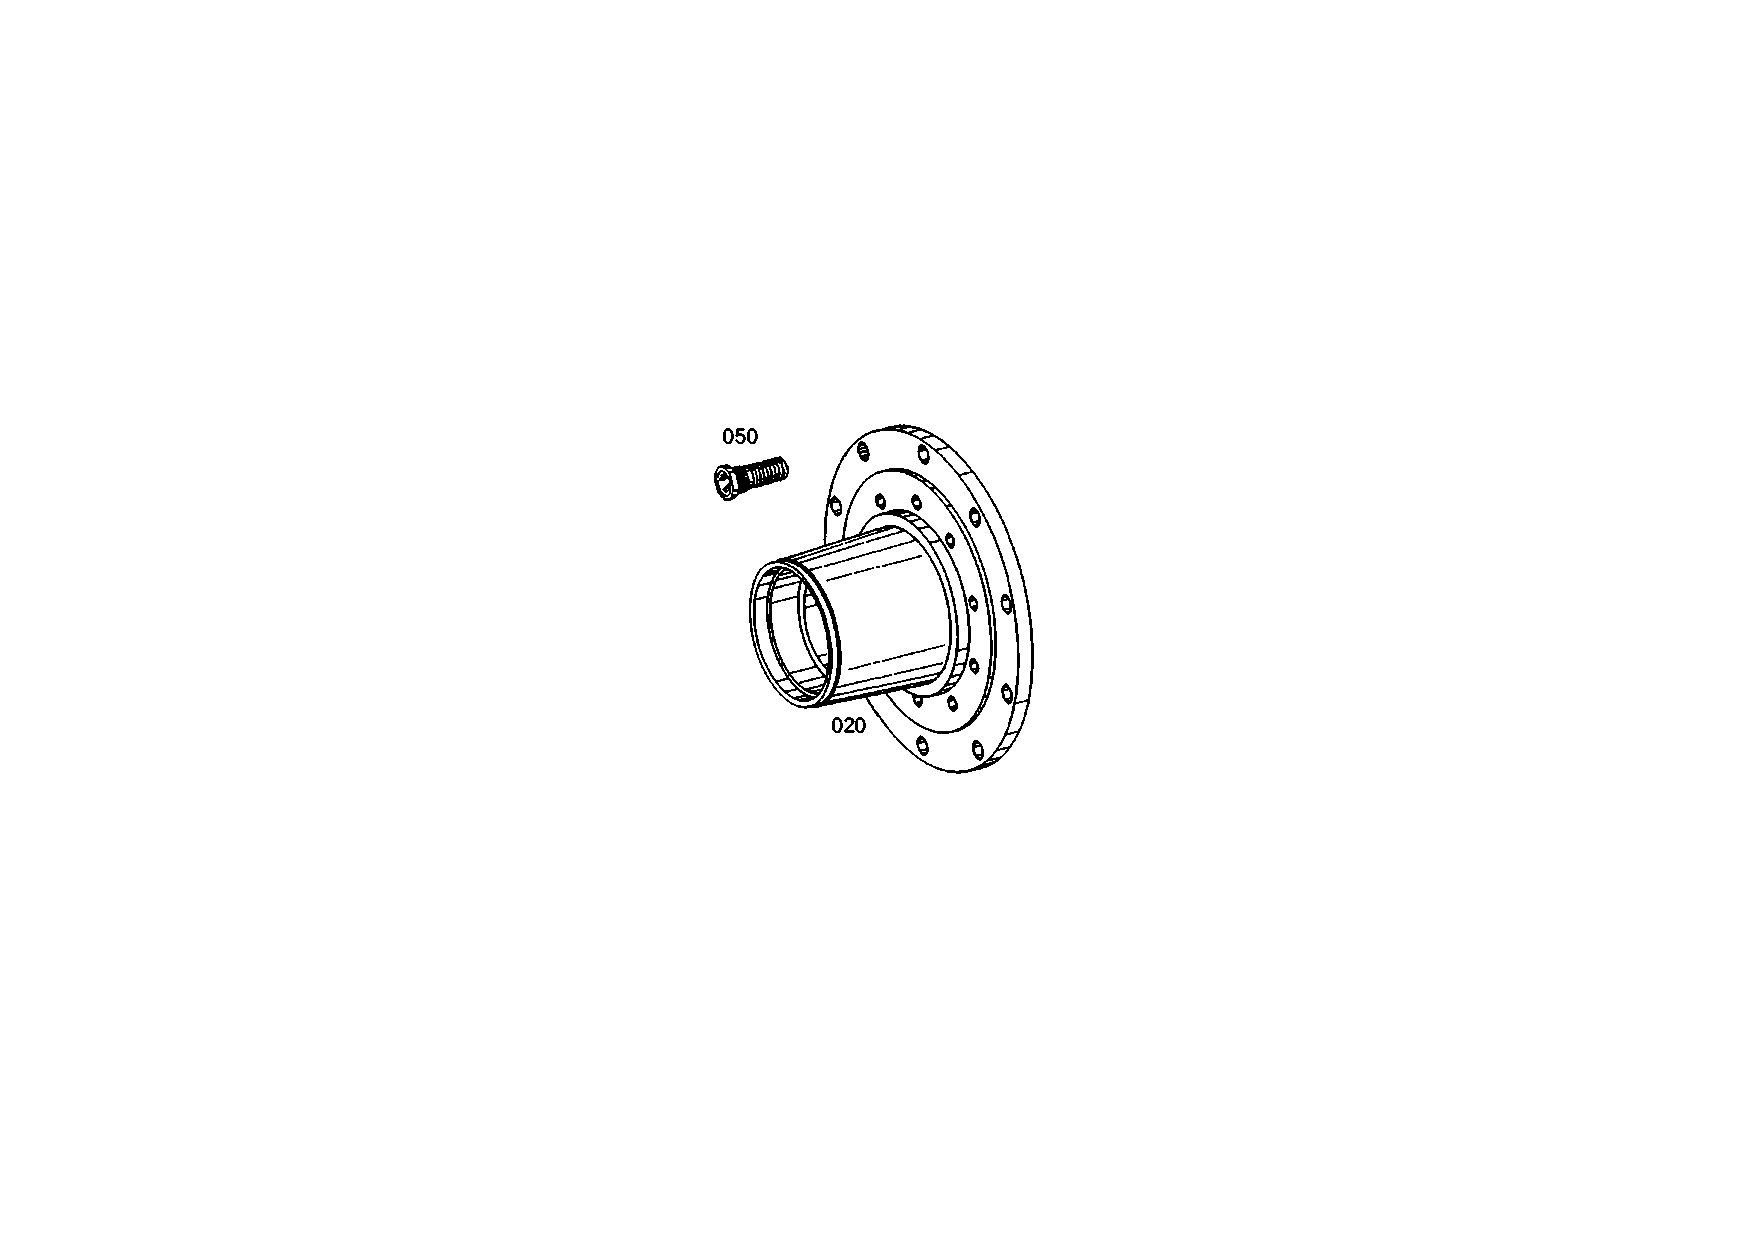 drawing for TEREX EQUIPMENT LIMITED 0204156 - WHEEL STUD (figure 3)